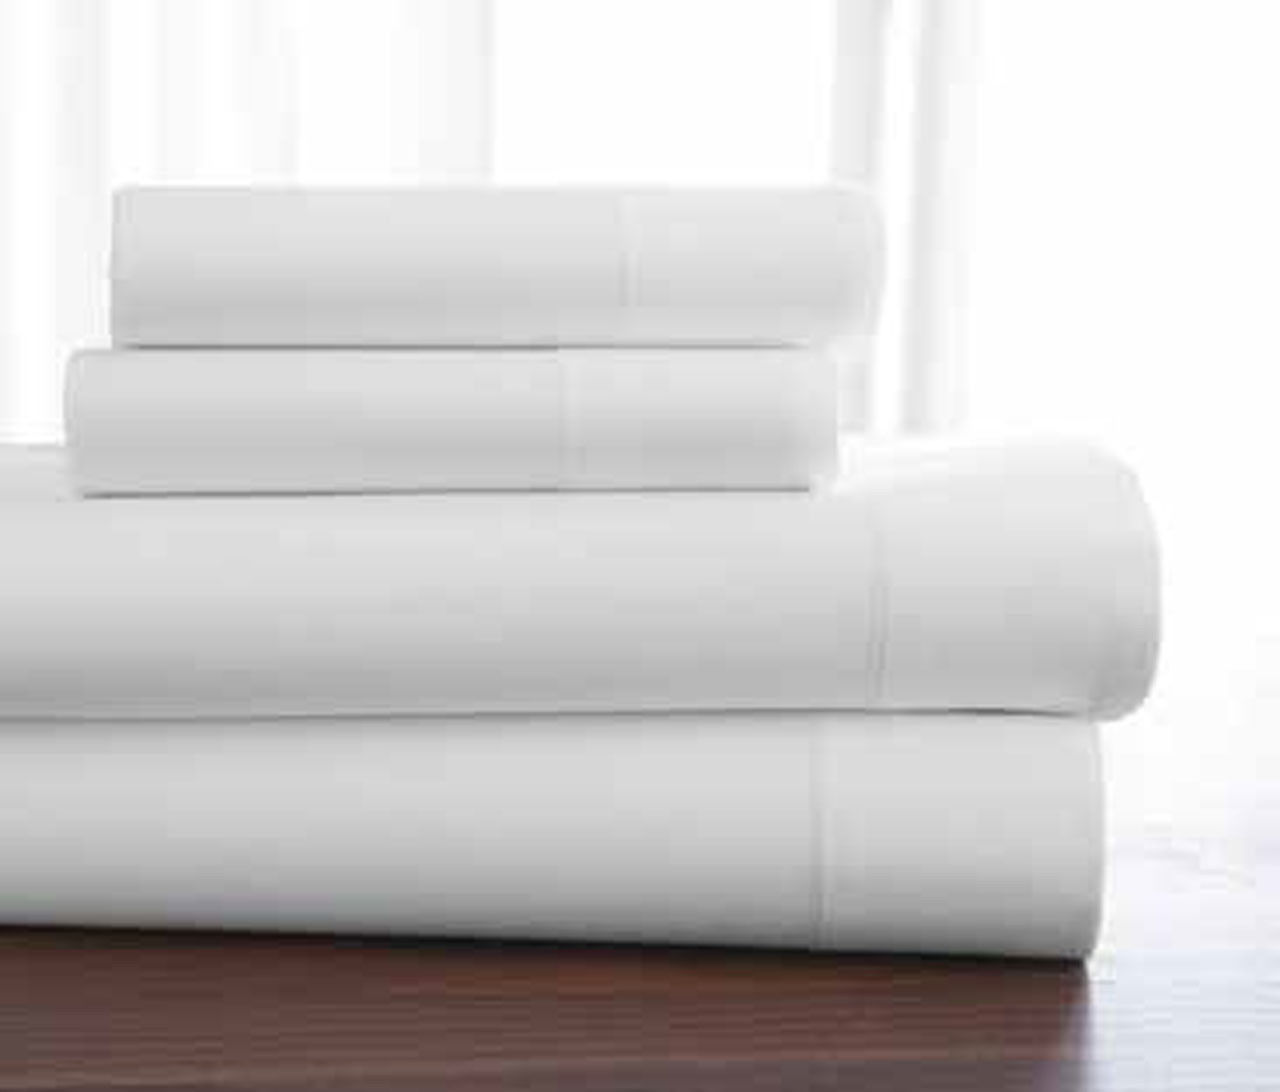 What sleep experience do Welspun T-400 Premium Hygrocotton Sheets provide?